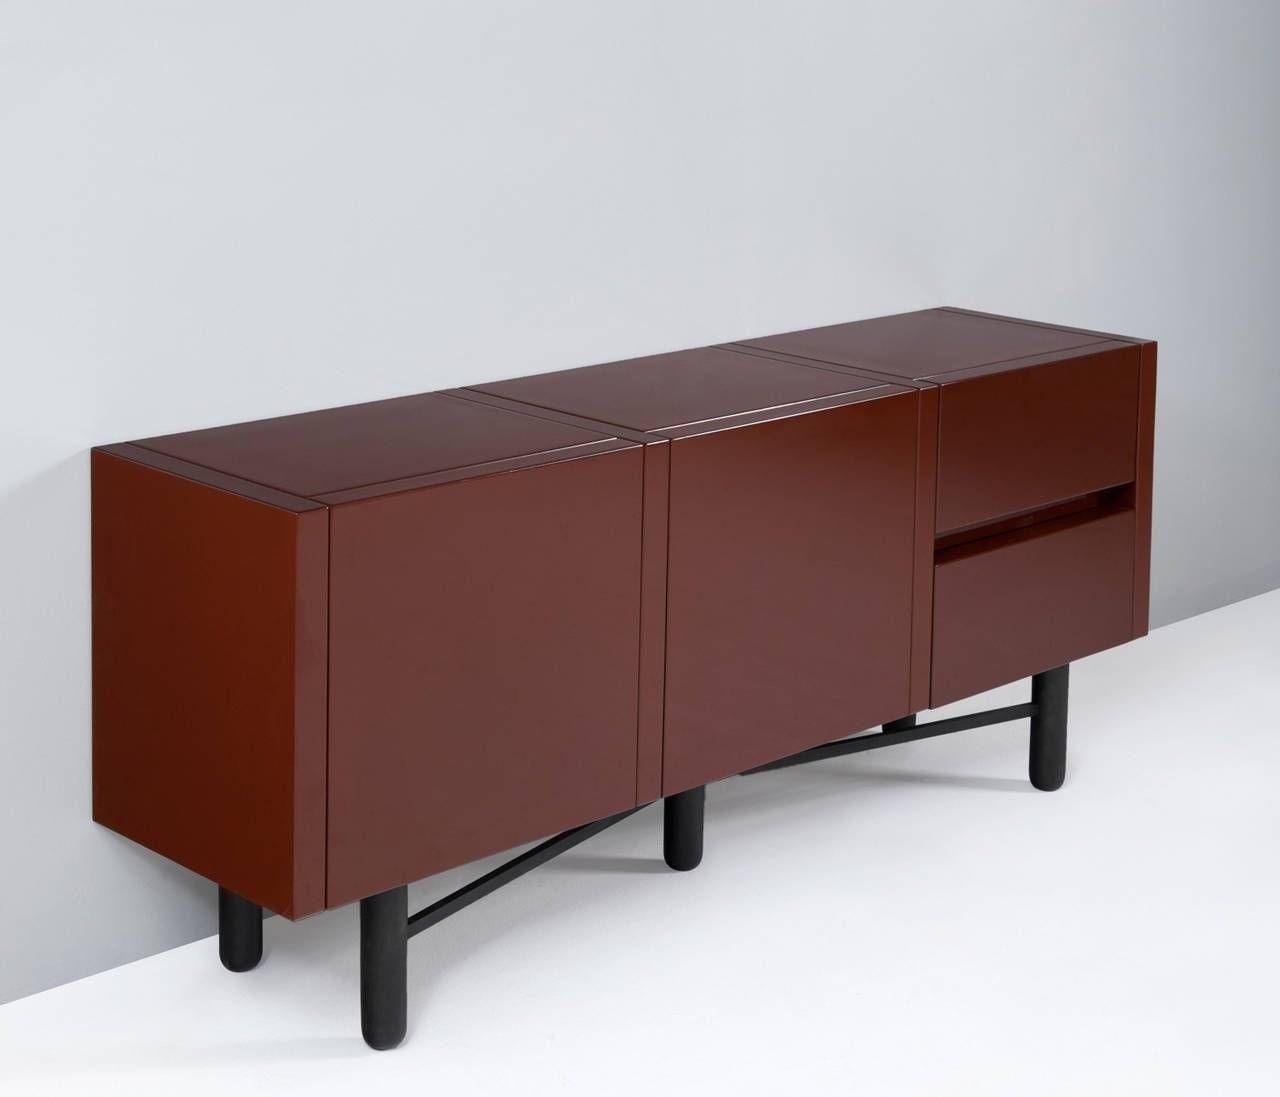 Roche Bobois Red Lacquered High Gloss Sideboard For Sale At 1stdibs Regarding High Gloss Black Sideboard (View 6 of 20)